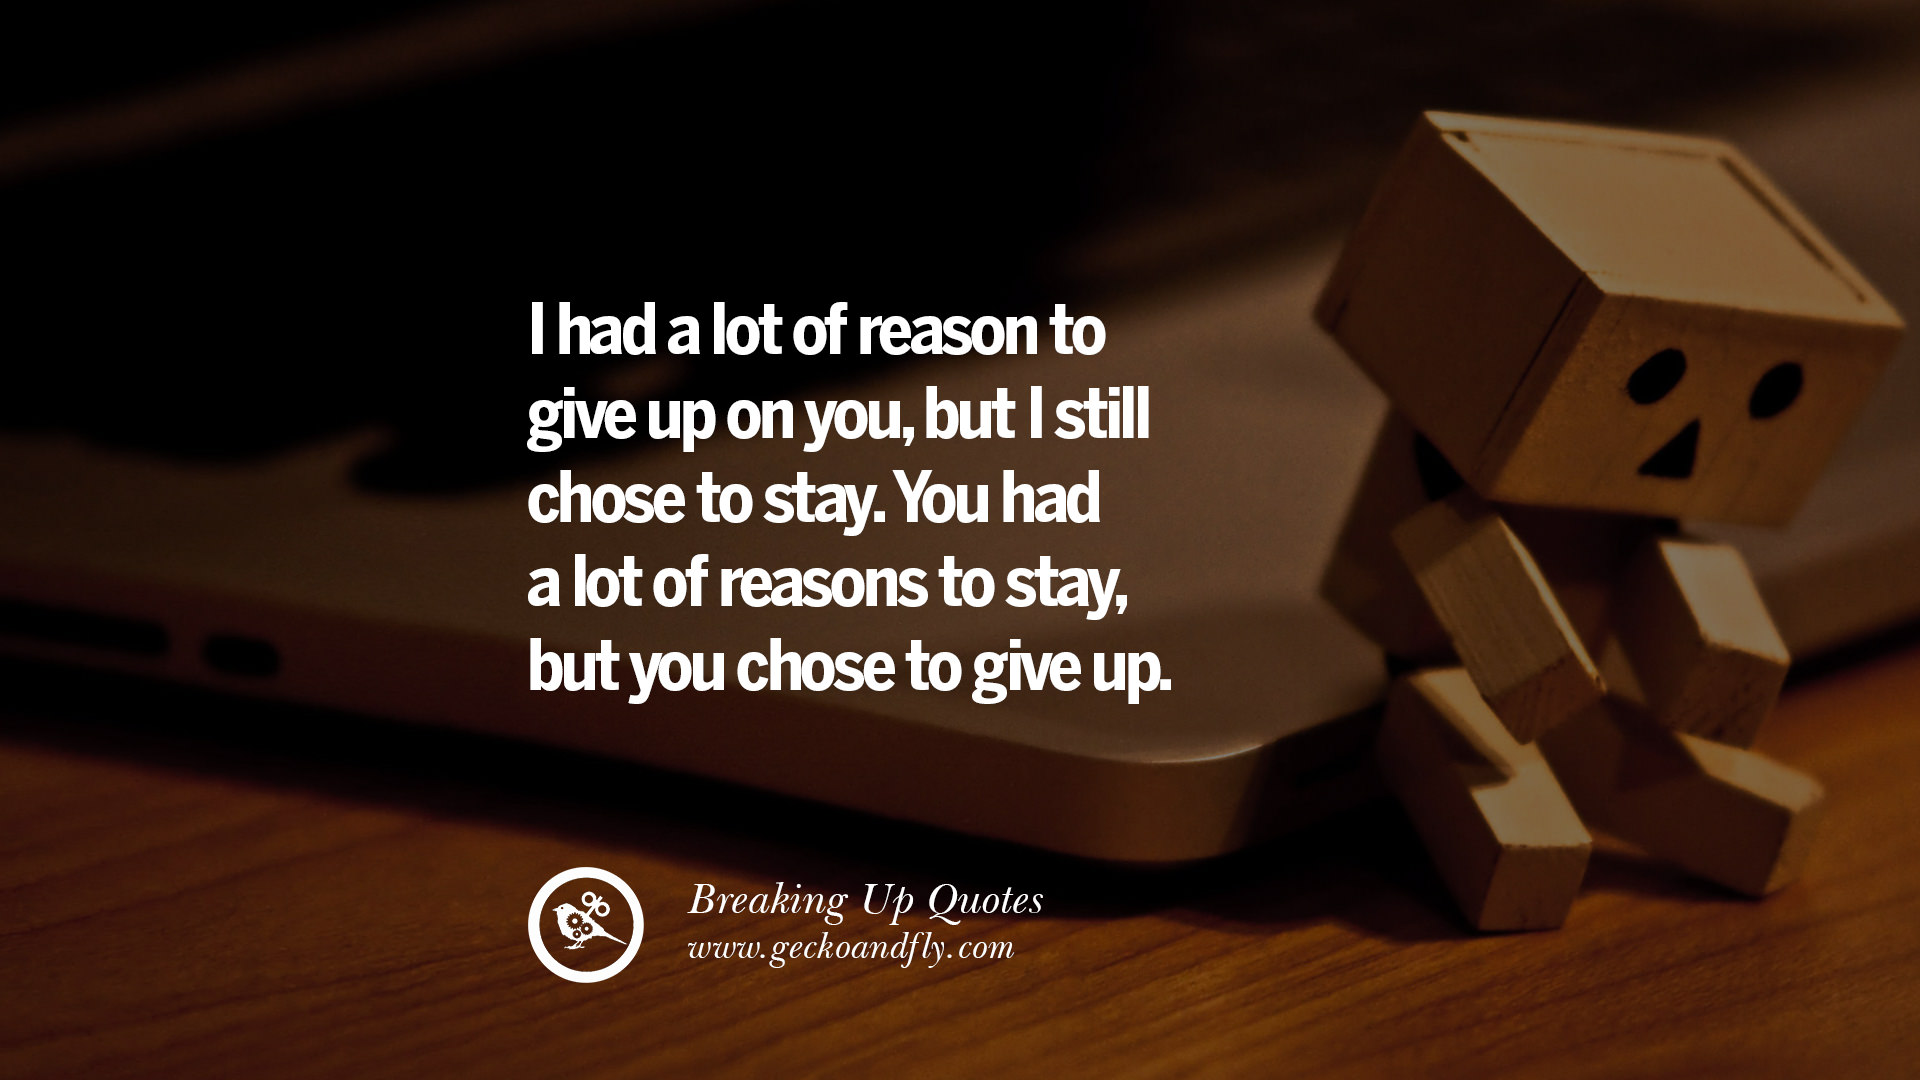 Still chose you. To give reason.